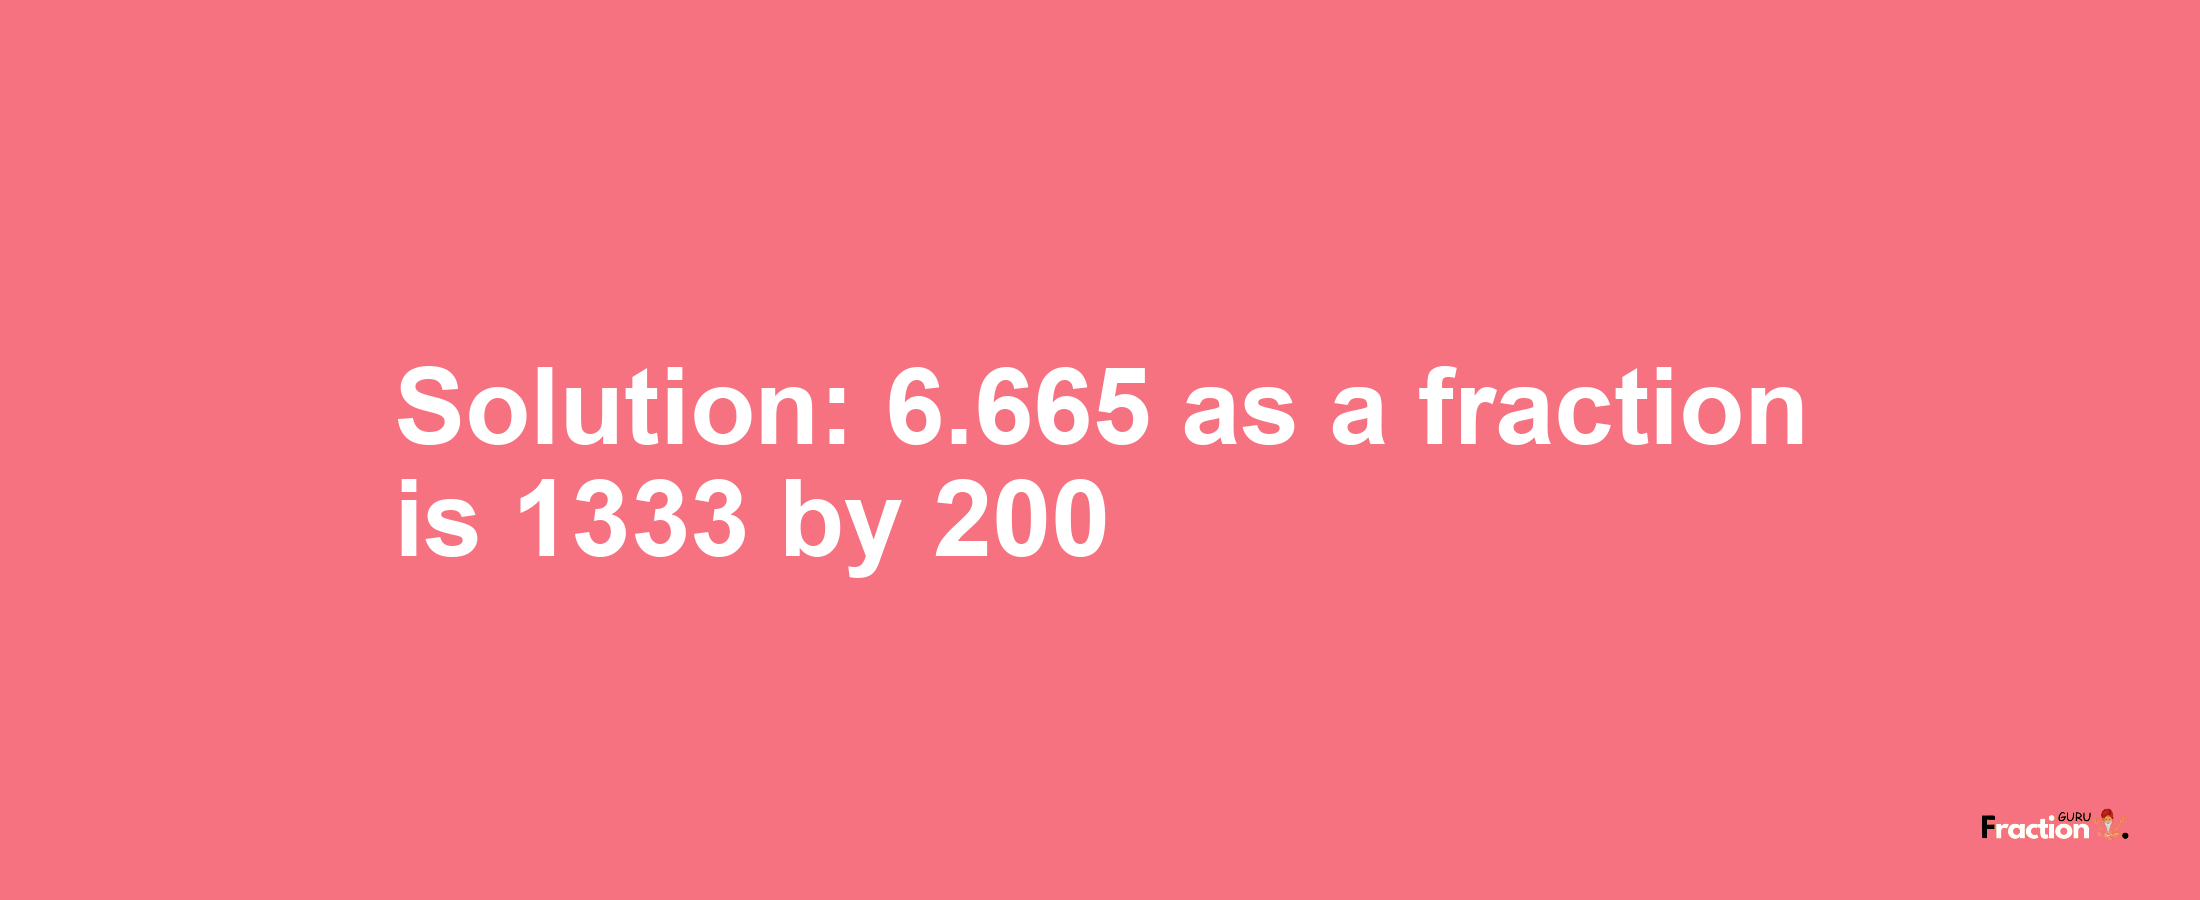 Solution:6.665 as a fraction is 1333/200